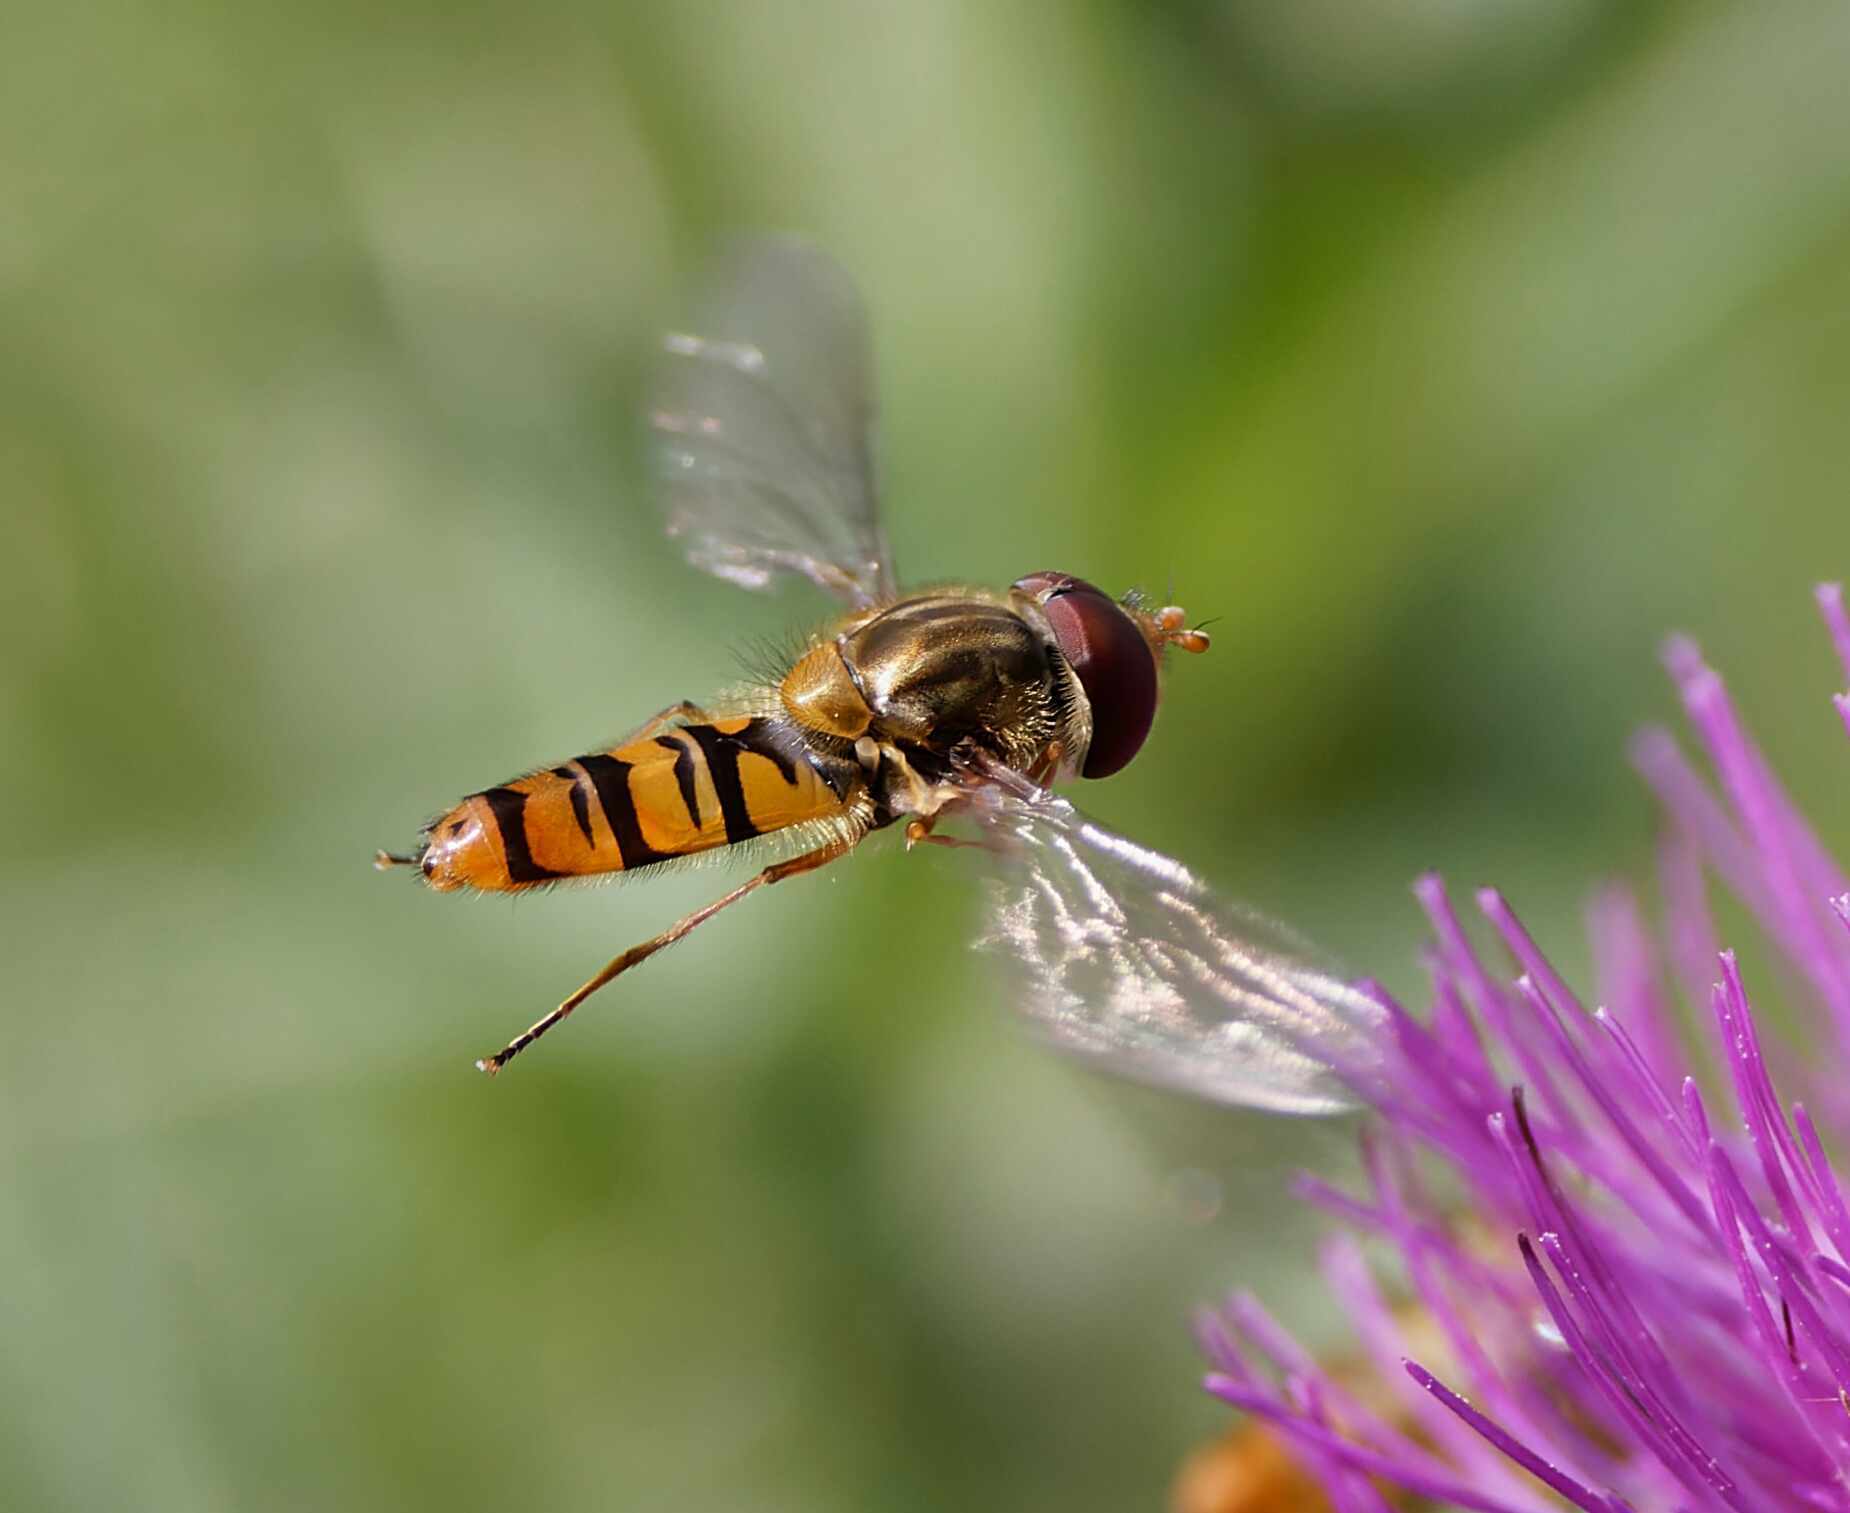 A marmalade hover fly by Myrfyn Davies